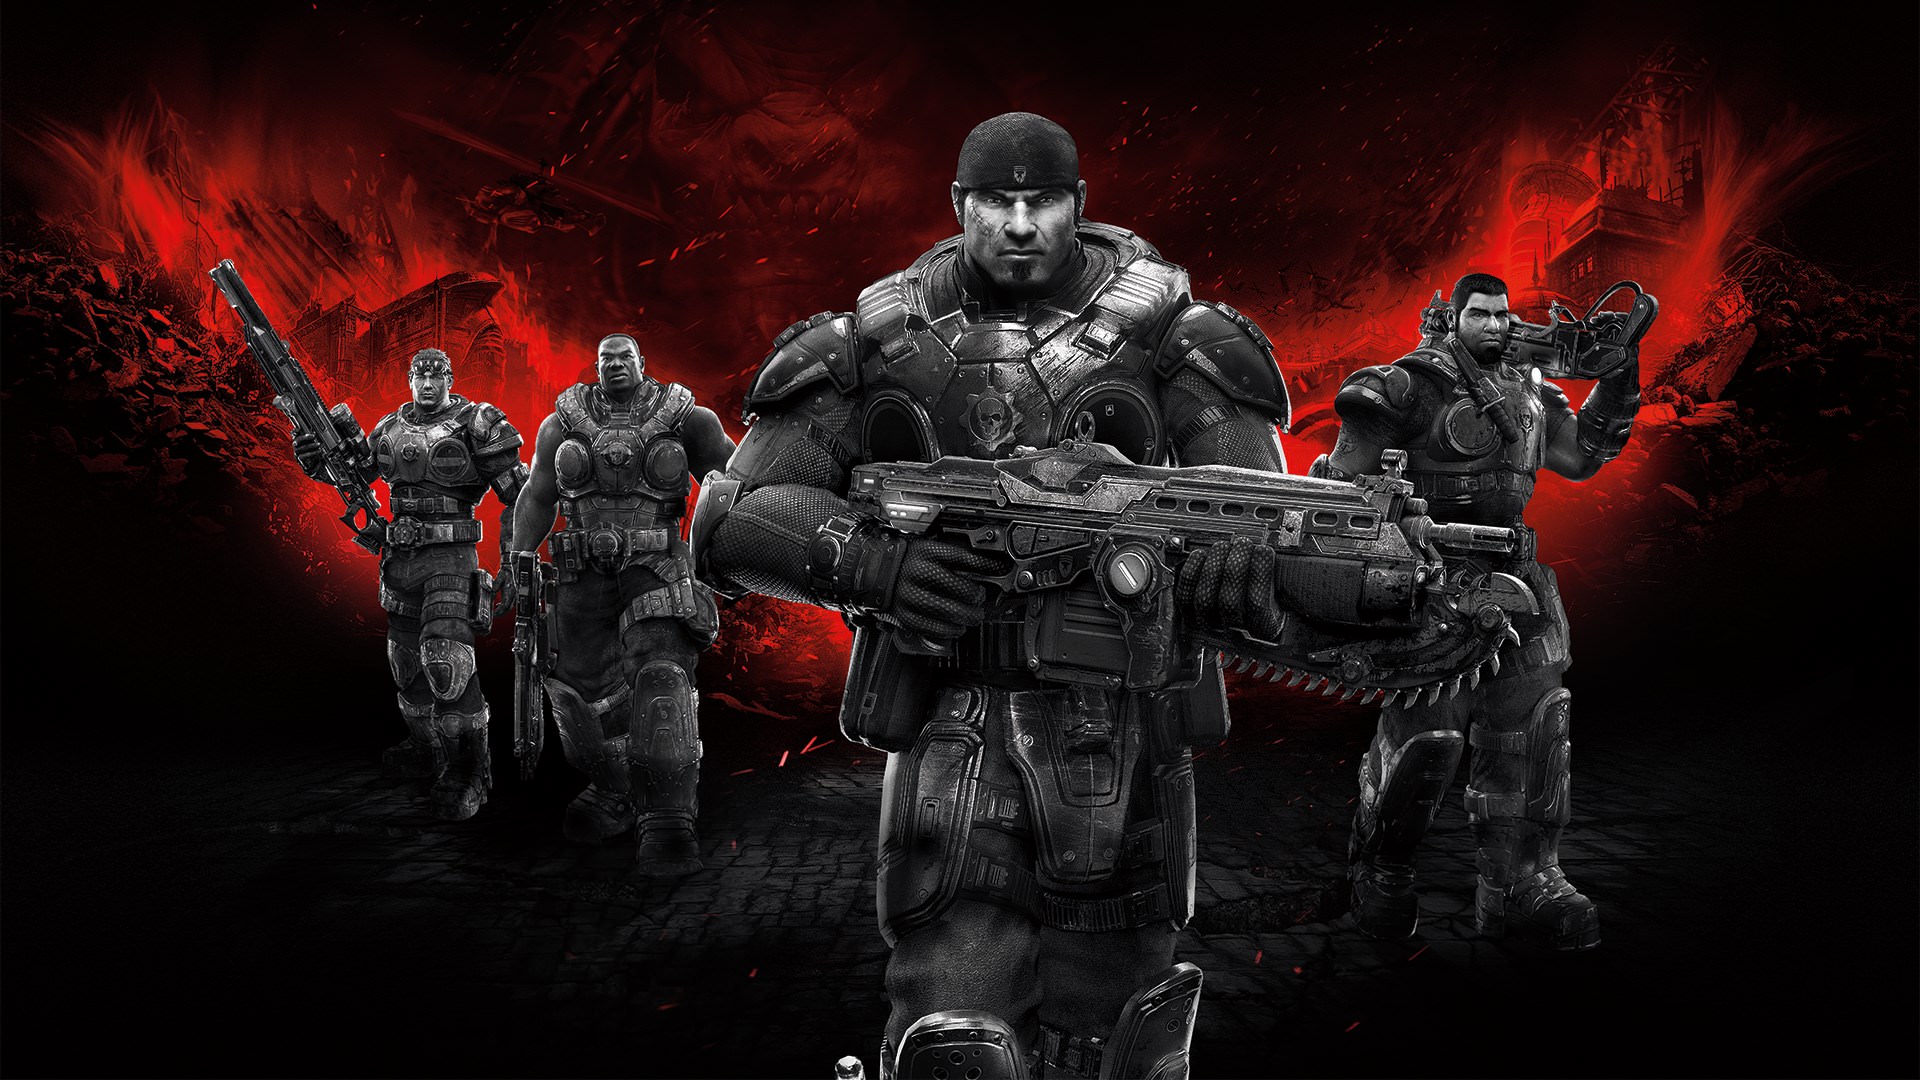 Characters of the Gears of War series